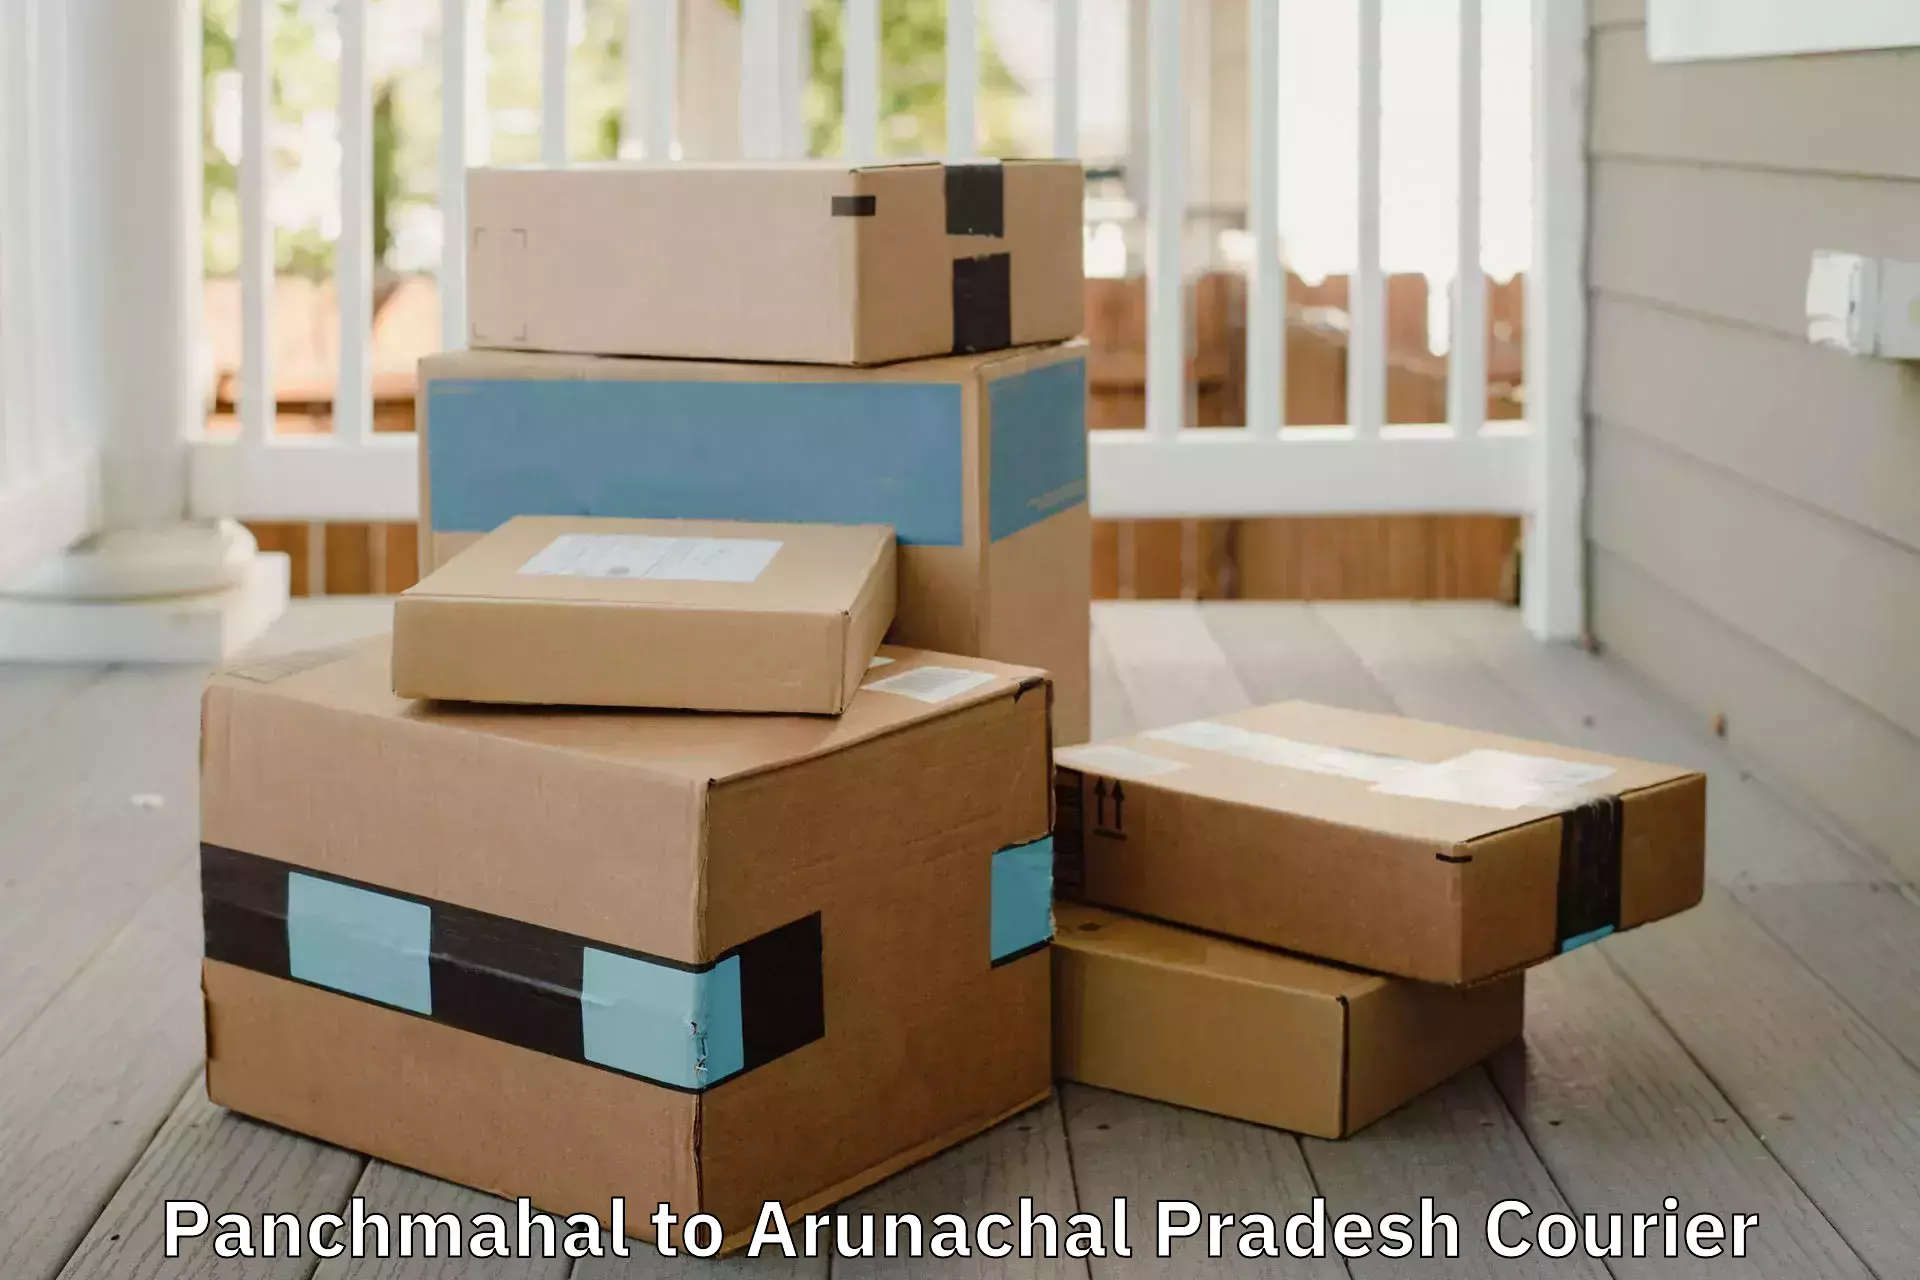 Quality moving and storage Panchmahal to Pasighat